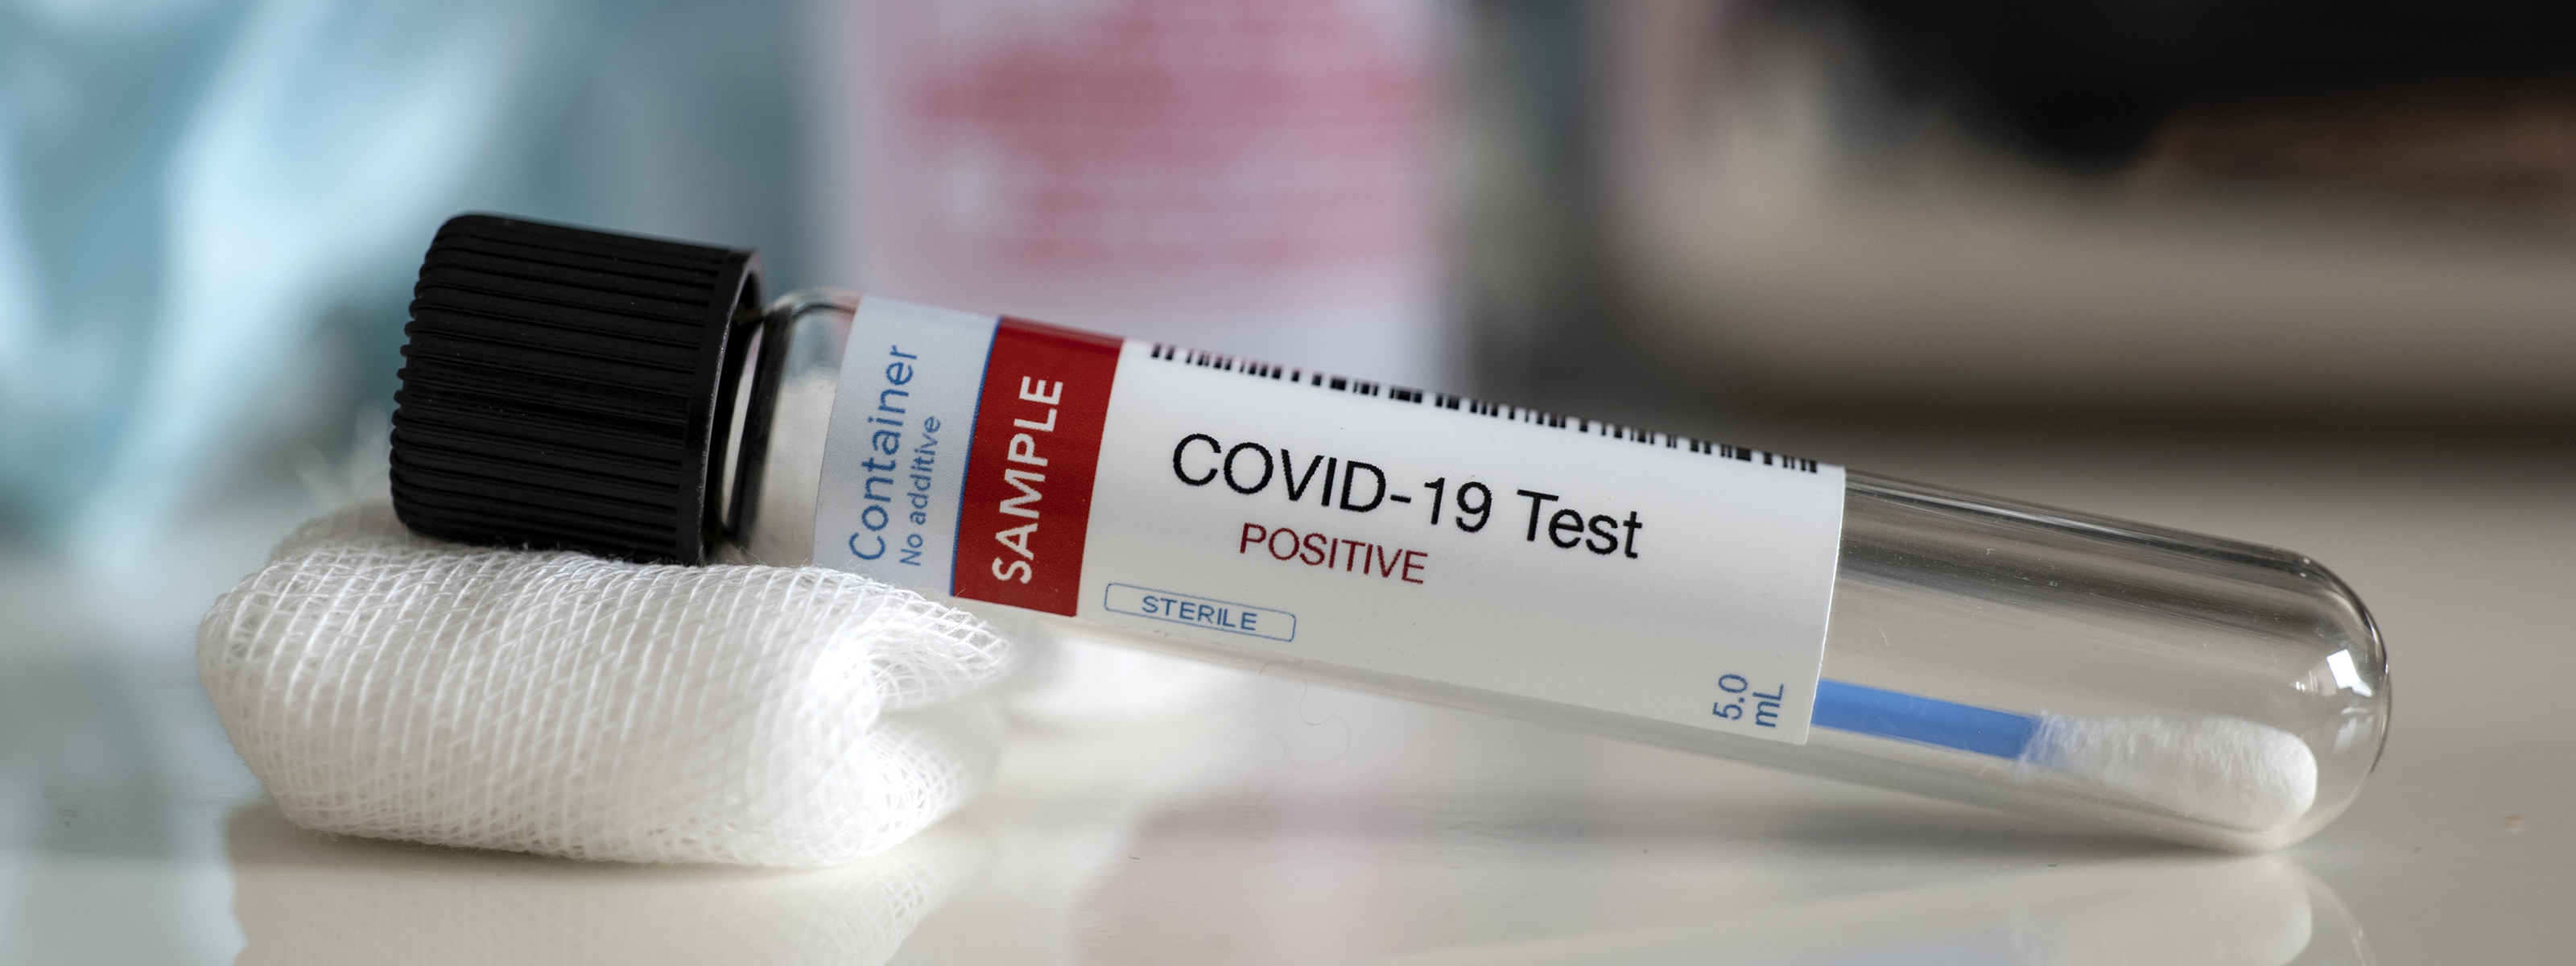 Why Is an Antigen Test a Big Deal for COVID-19?